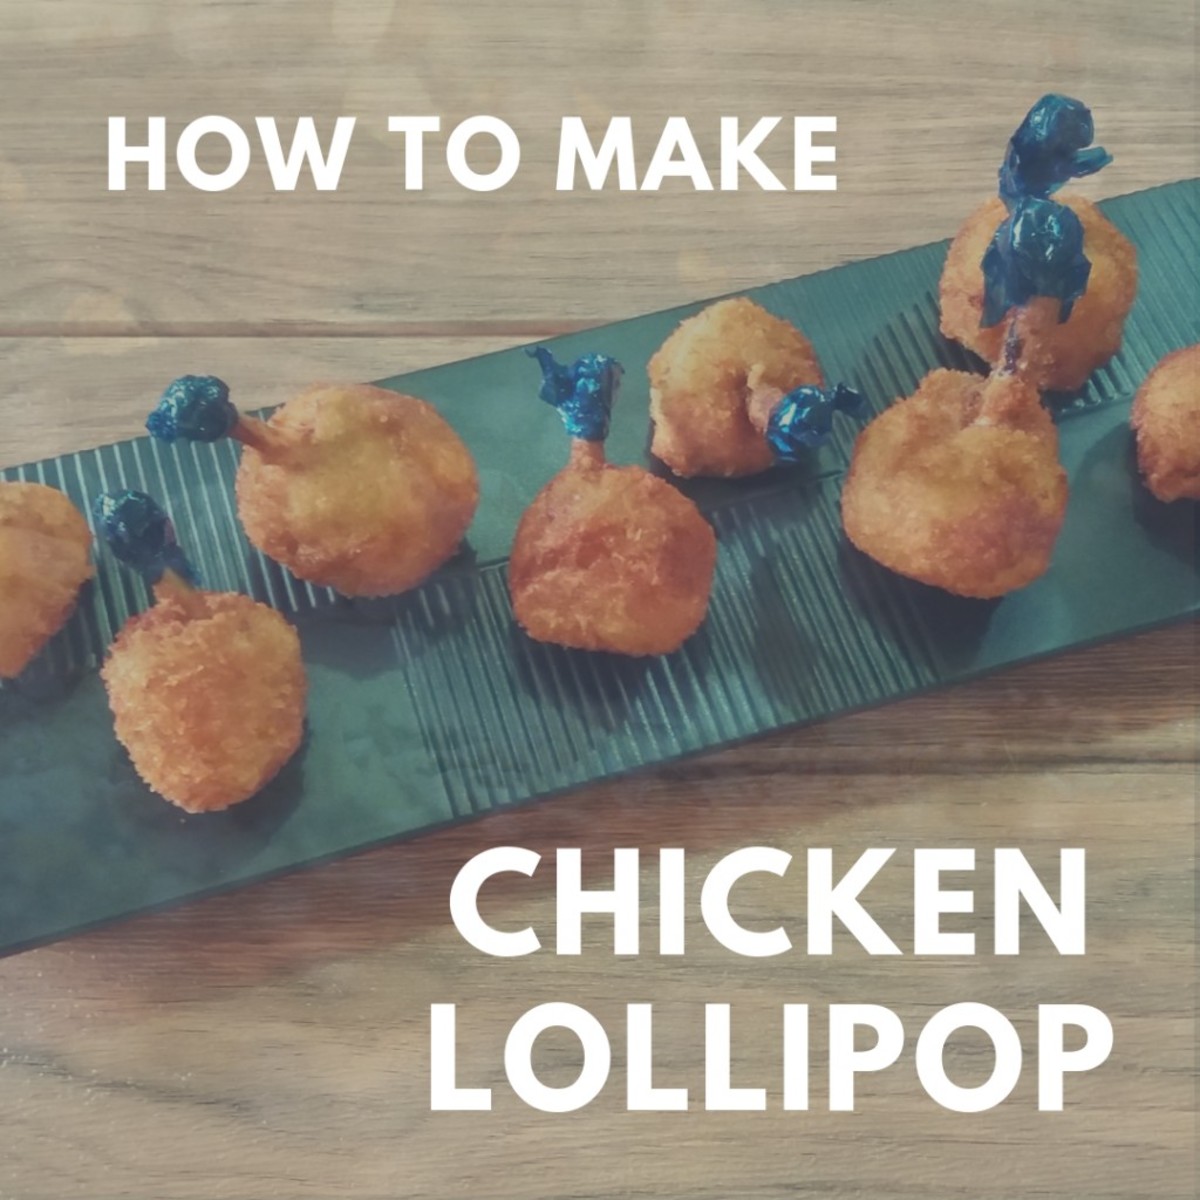 Learn how to make chicken lollipops out of chicken wings